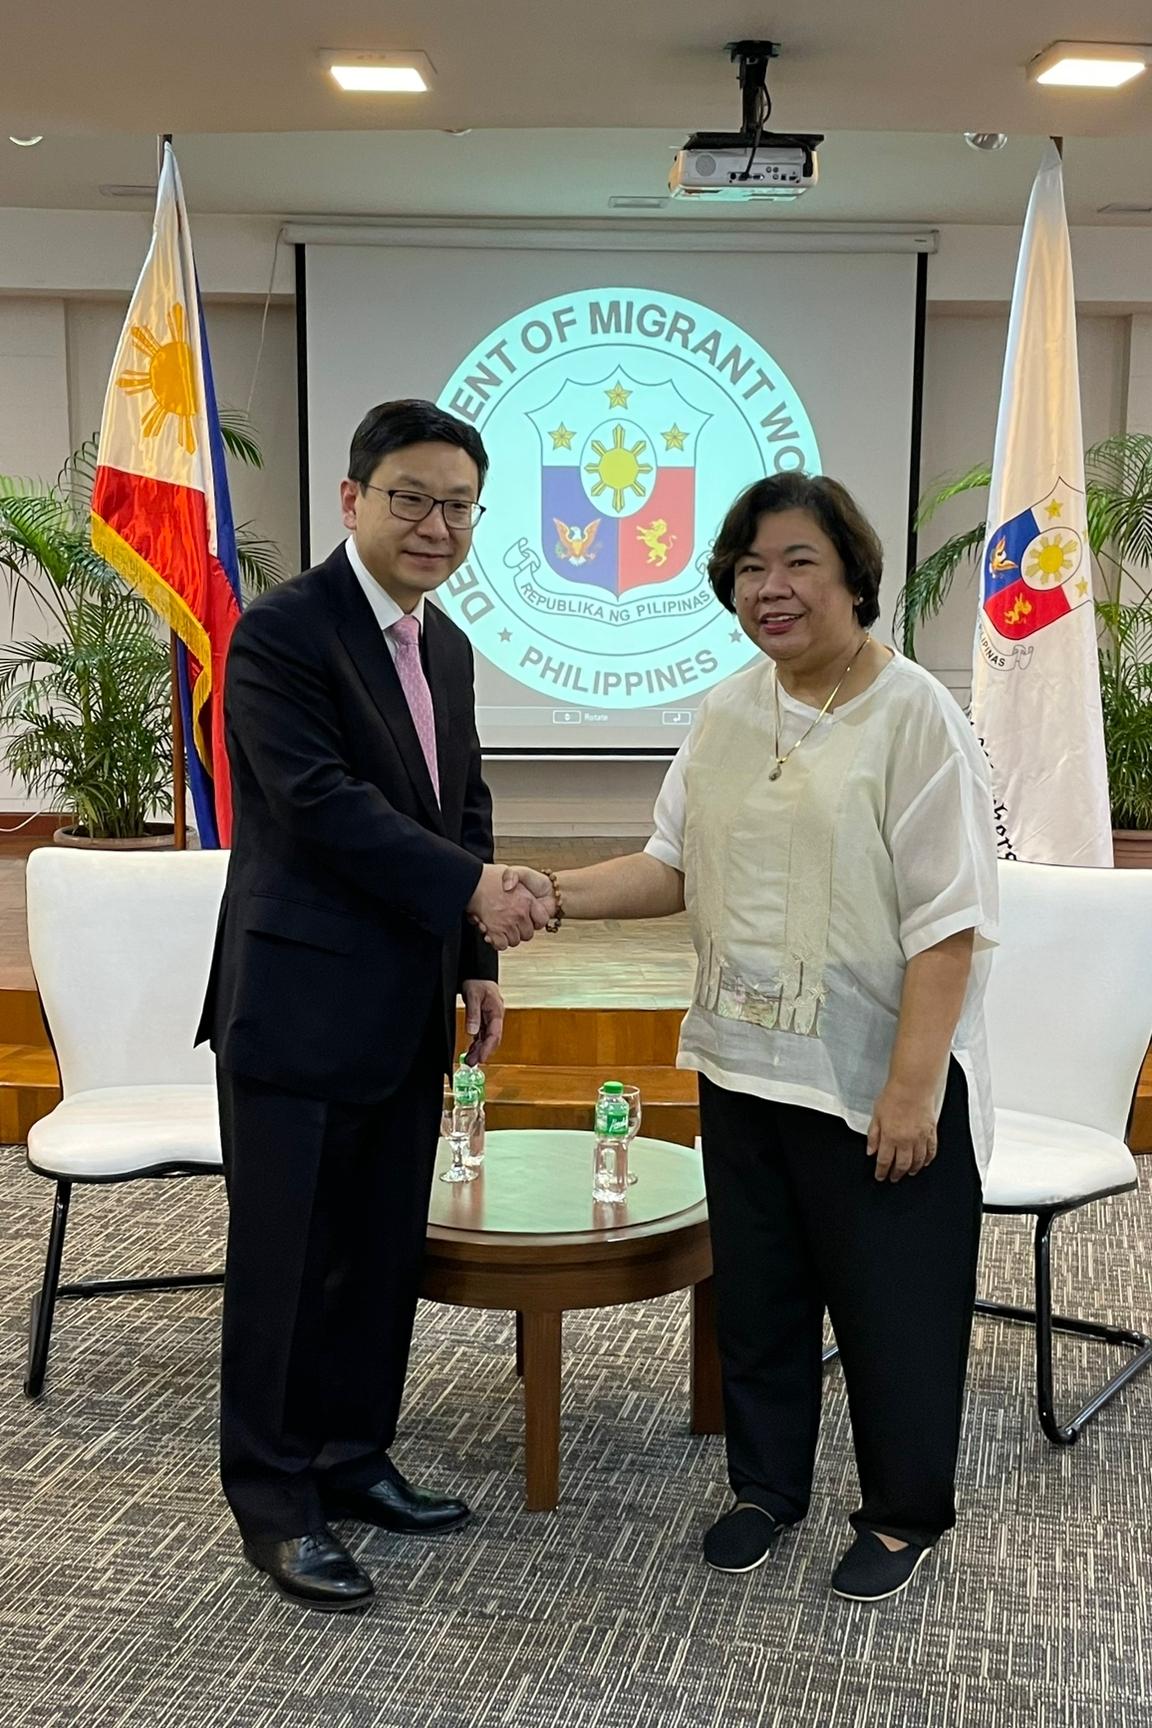 The Secretary for Labour and Welfare, Mr Chris Sun (left), called on the Secretary of Migrant Workers of the Philippines, Ms Susan Ople (right), yesterday morning (January 9) during his visit to Manila, the Philippines. They exchanged views on protecting foreign domestic helpers working in Hong Kong.